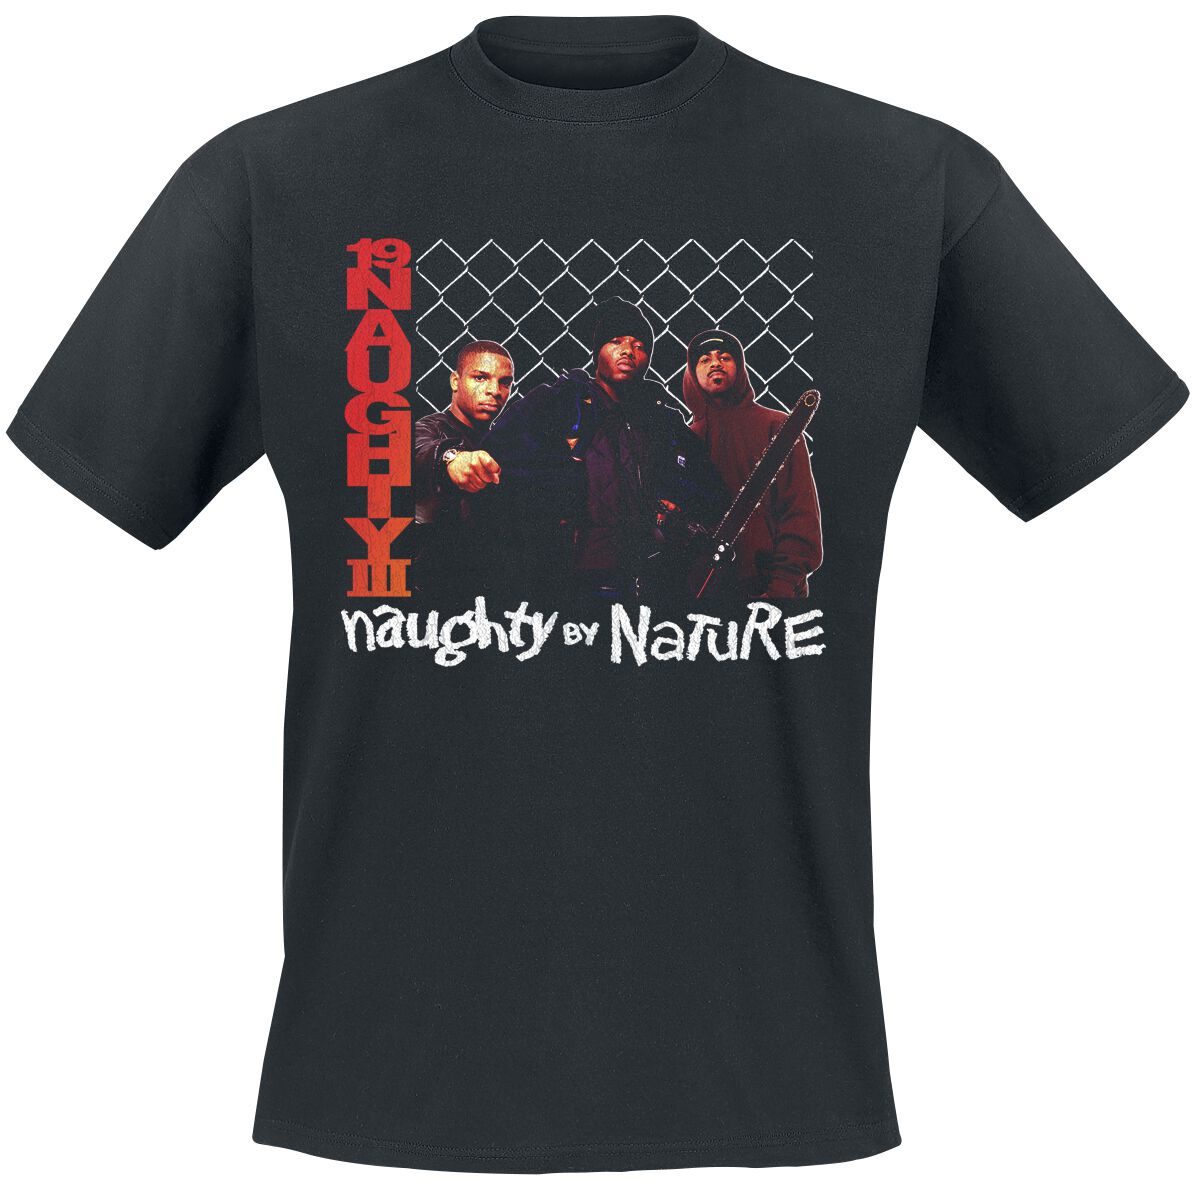 Naughty by Nature 19 Naughty 111 T-Shirt schwarz in L